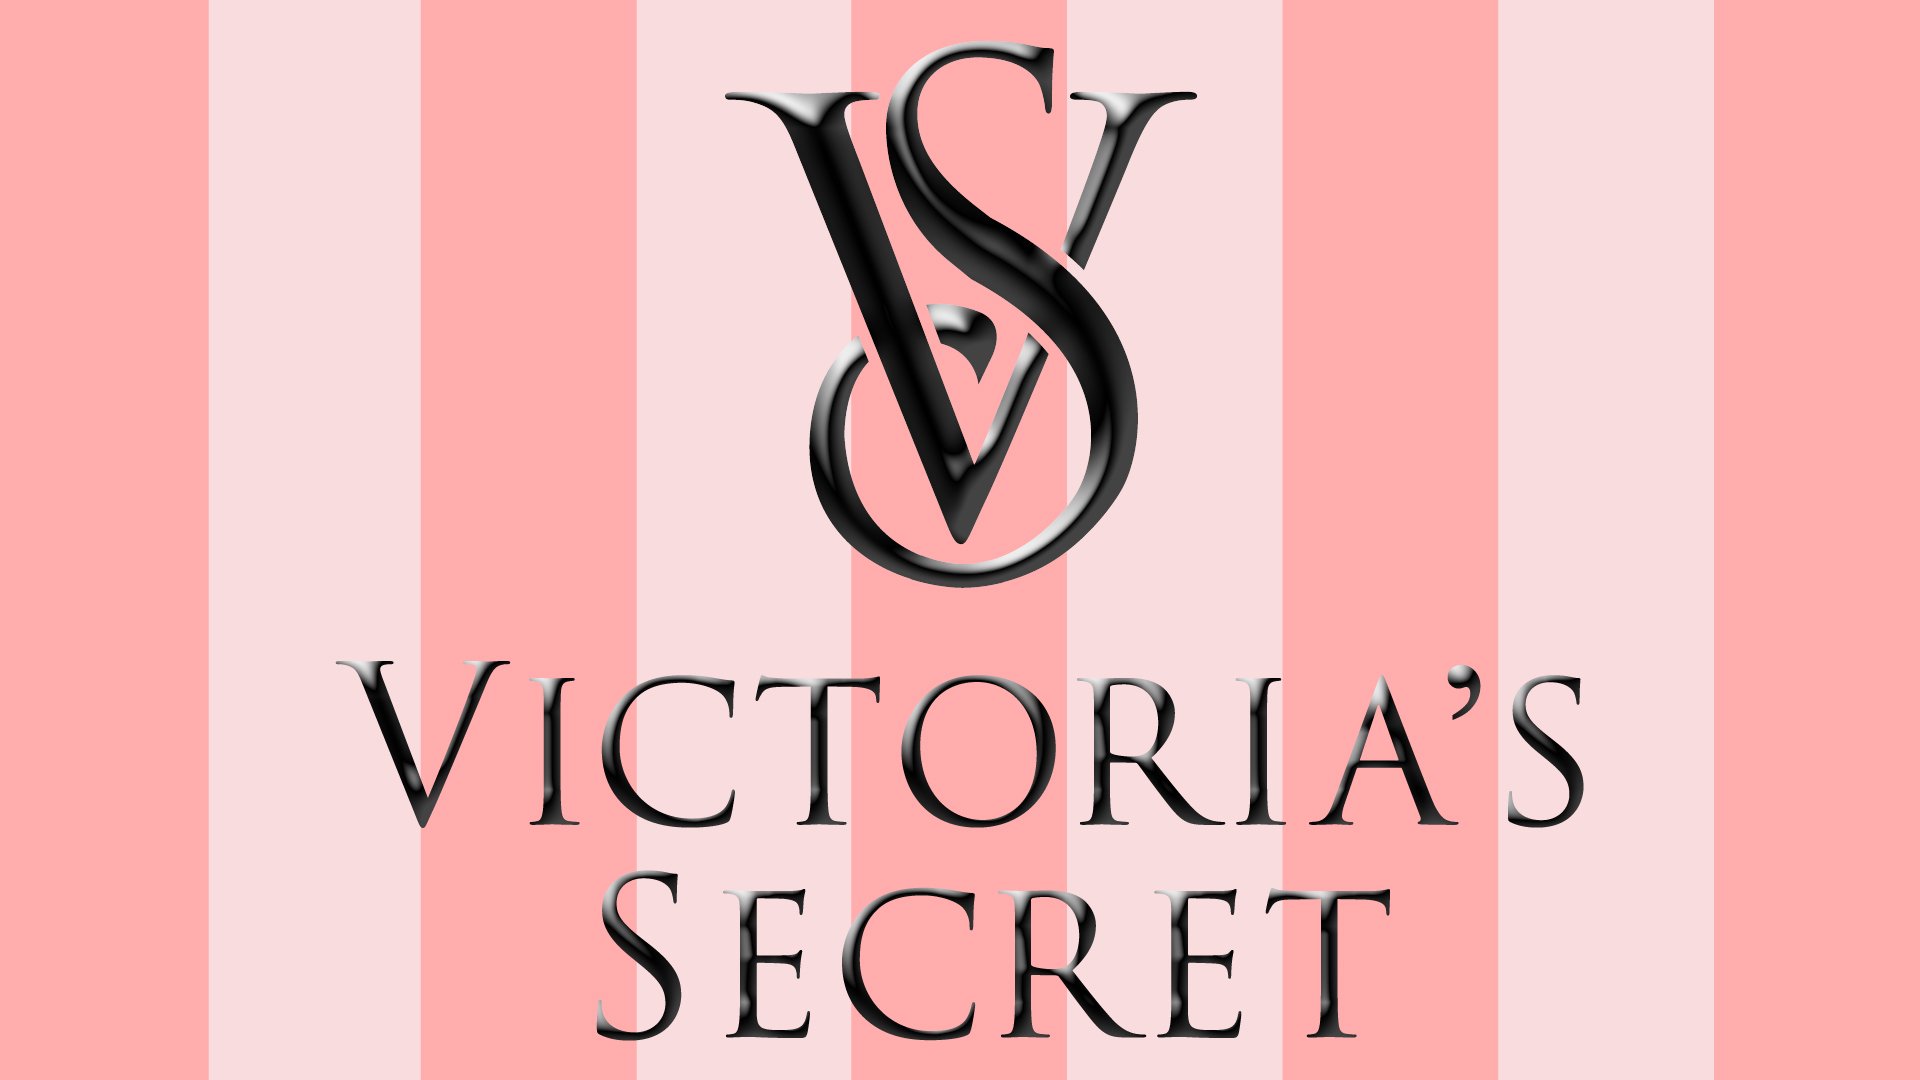 Victoria's Secret - All that glitters is gold logo hardware on our